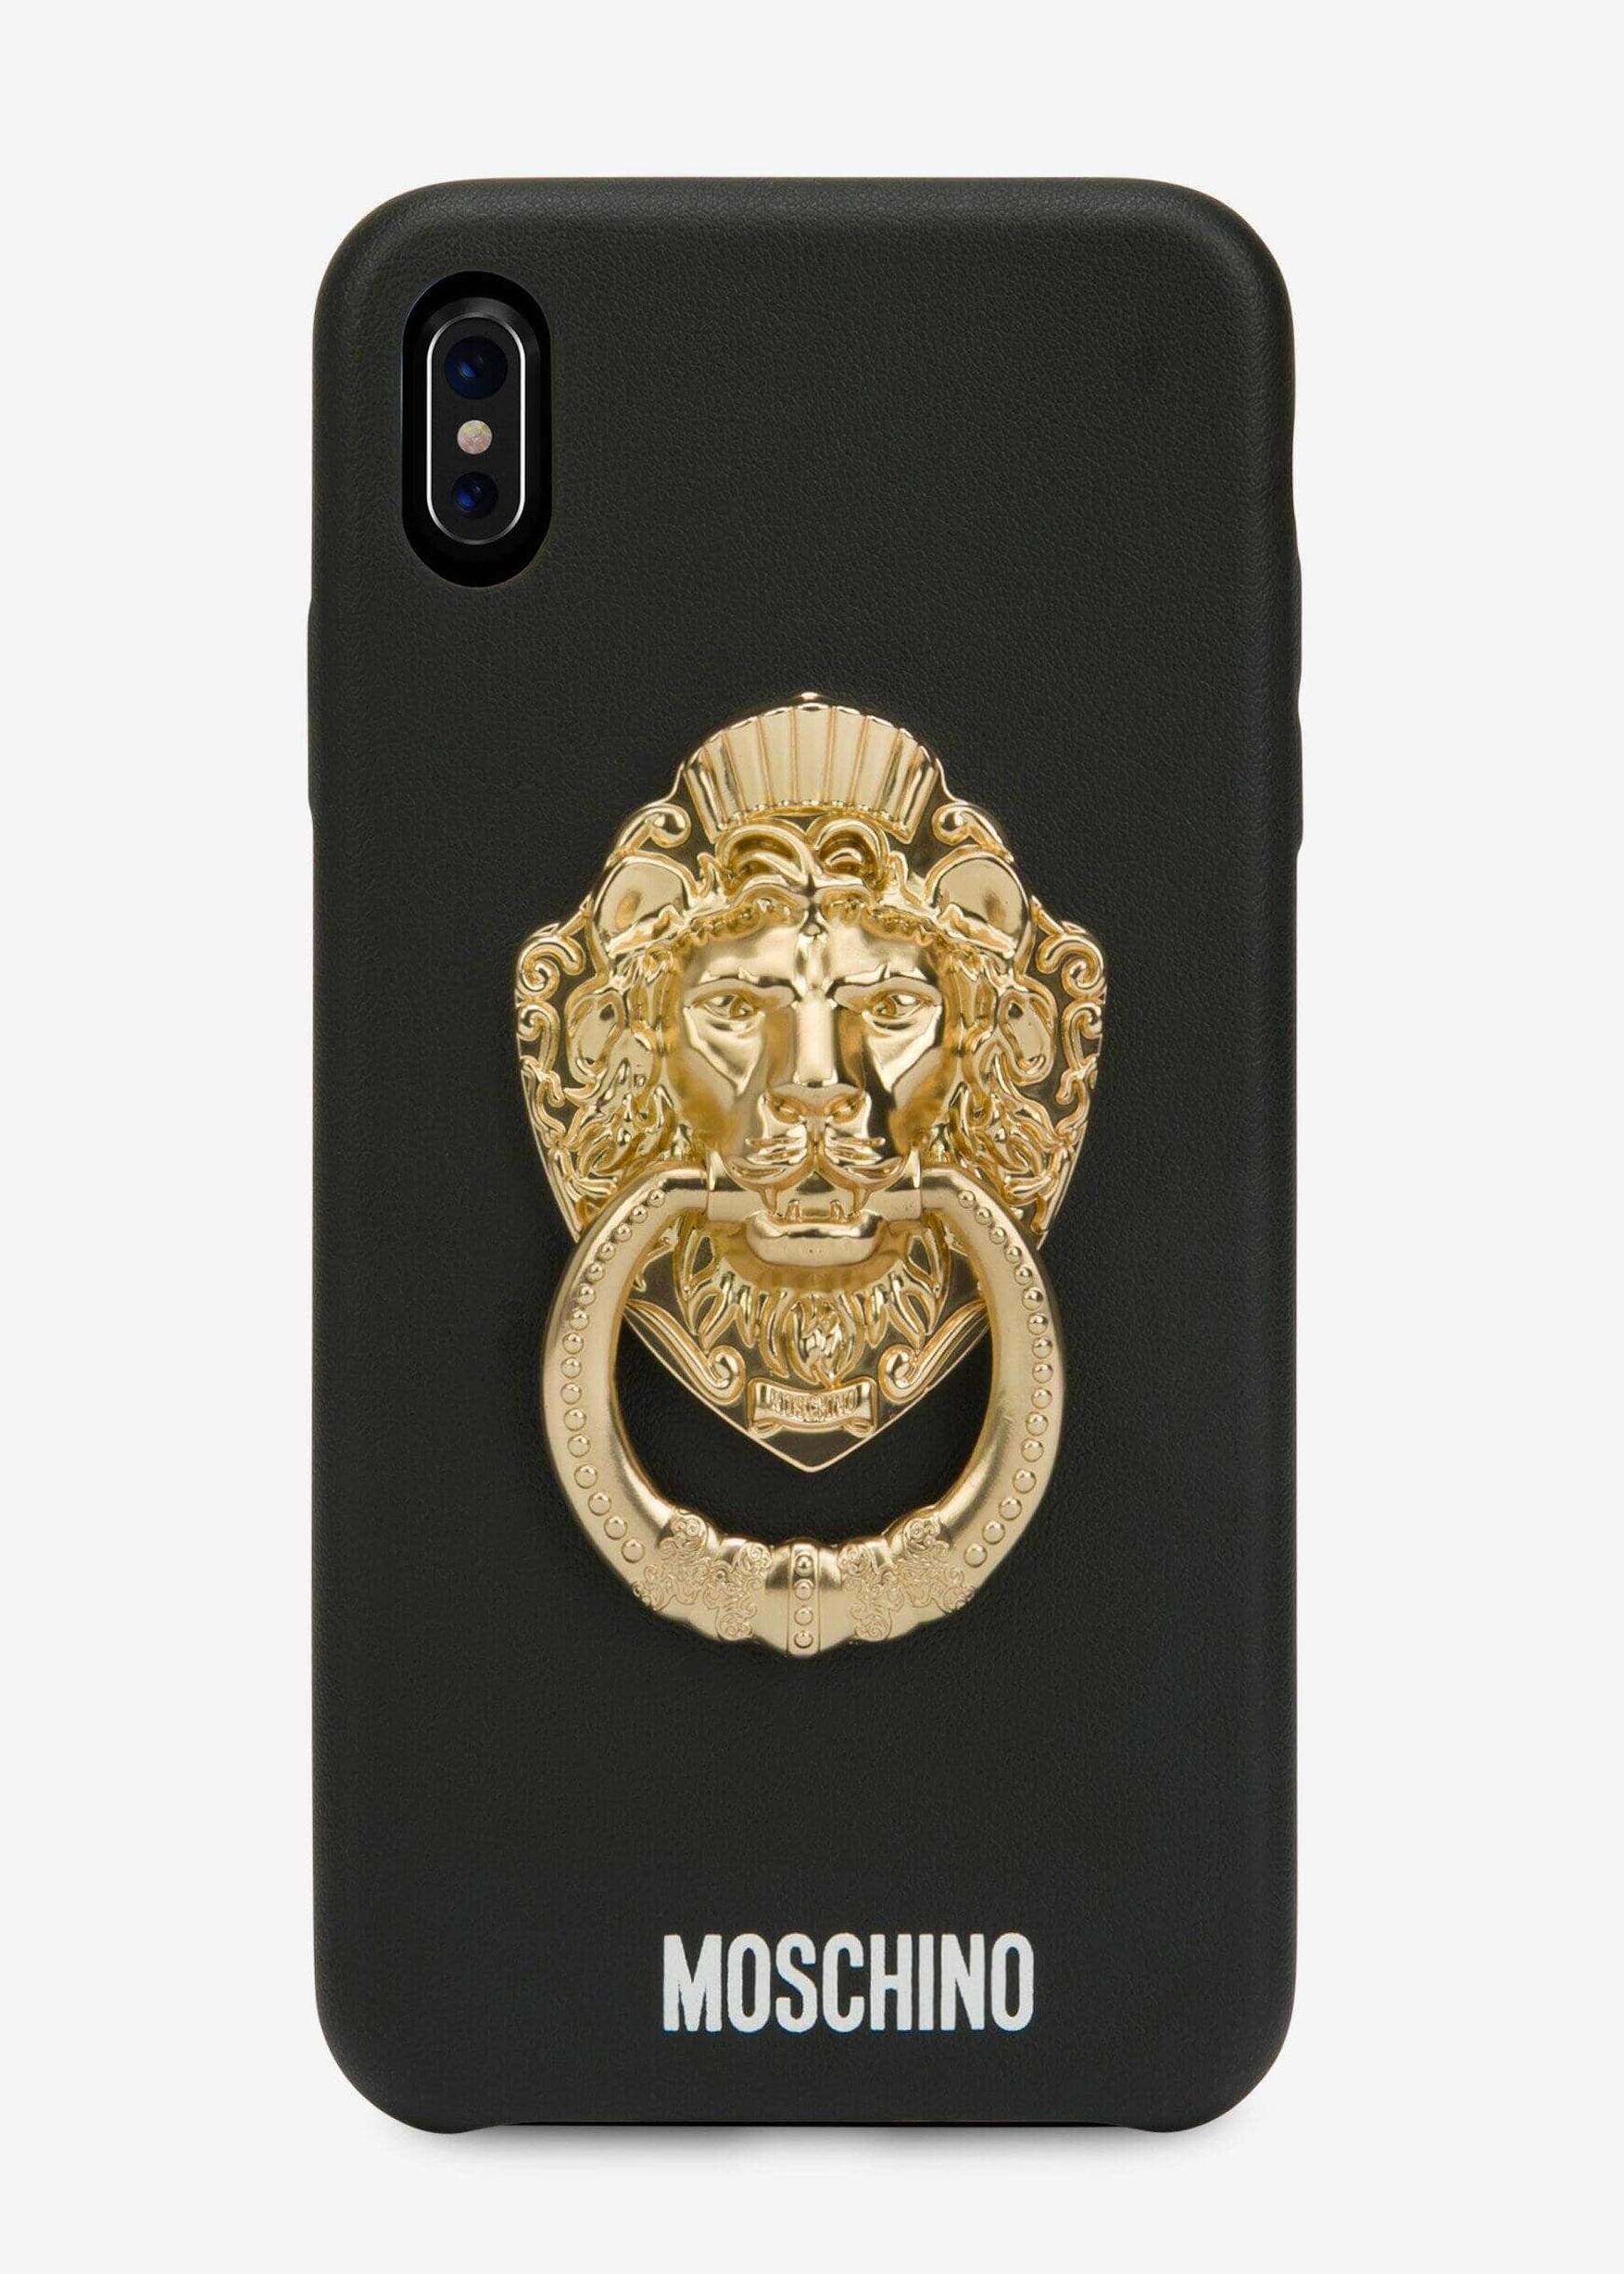 moschino phone case iphone xr